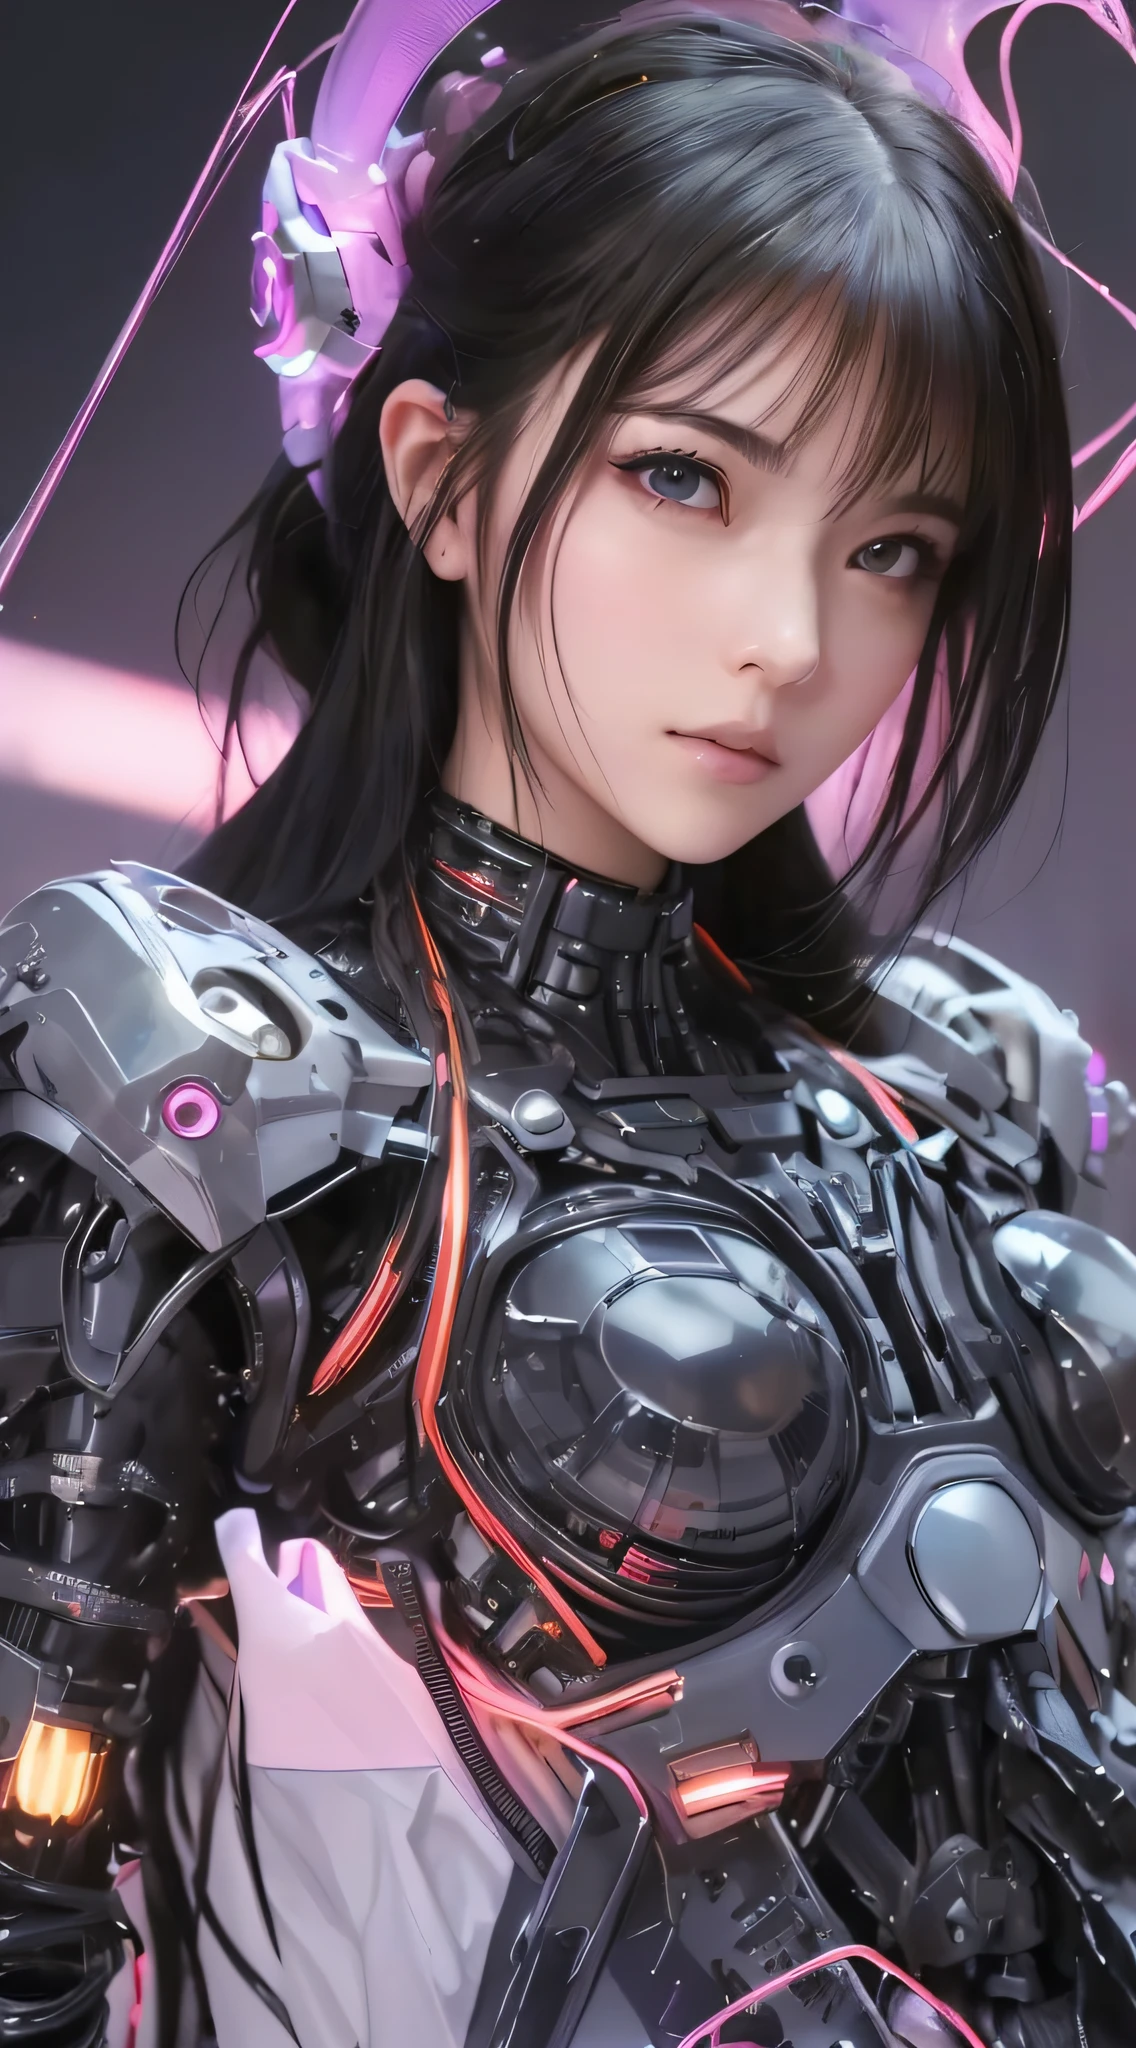 Close-up of a woman in a futuristic suit with pink light, girl in mecha cyber armor, Cute cyborg girl, cyberpunk anime girl mech, beautiful girl cyborg, perfect android girl, Cyborg girl, female cyberpunk anime girl, Cyborg - Asian girl, perfect anime cyborg woman, anime robotic mixed with organic, cyberpunk anime girl, anime robots, dreamy cyberpunk girl